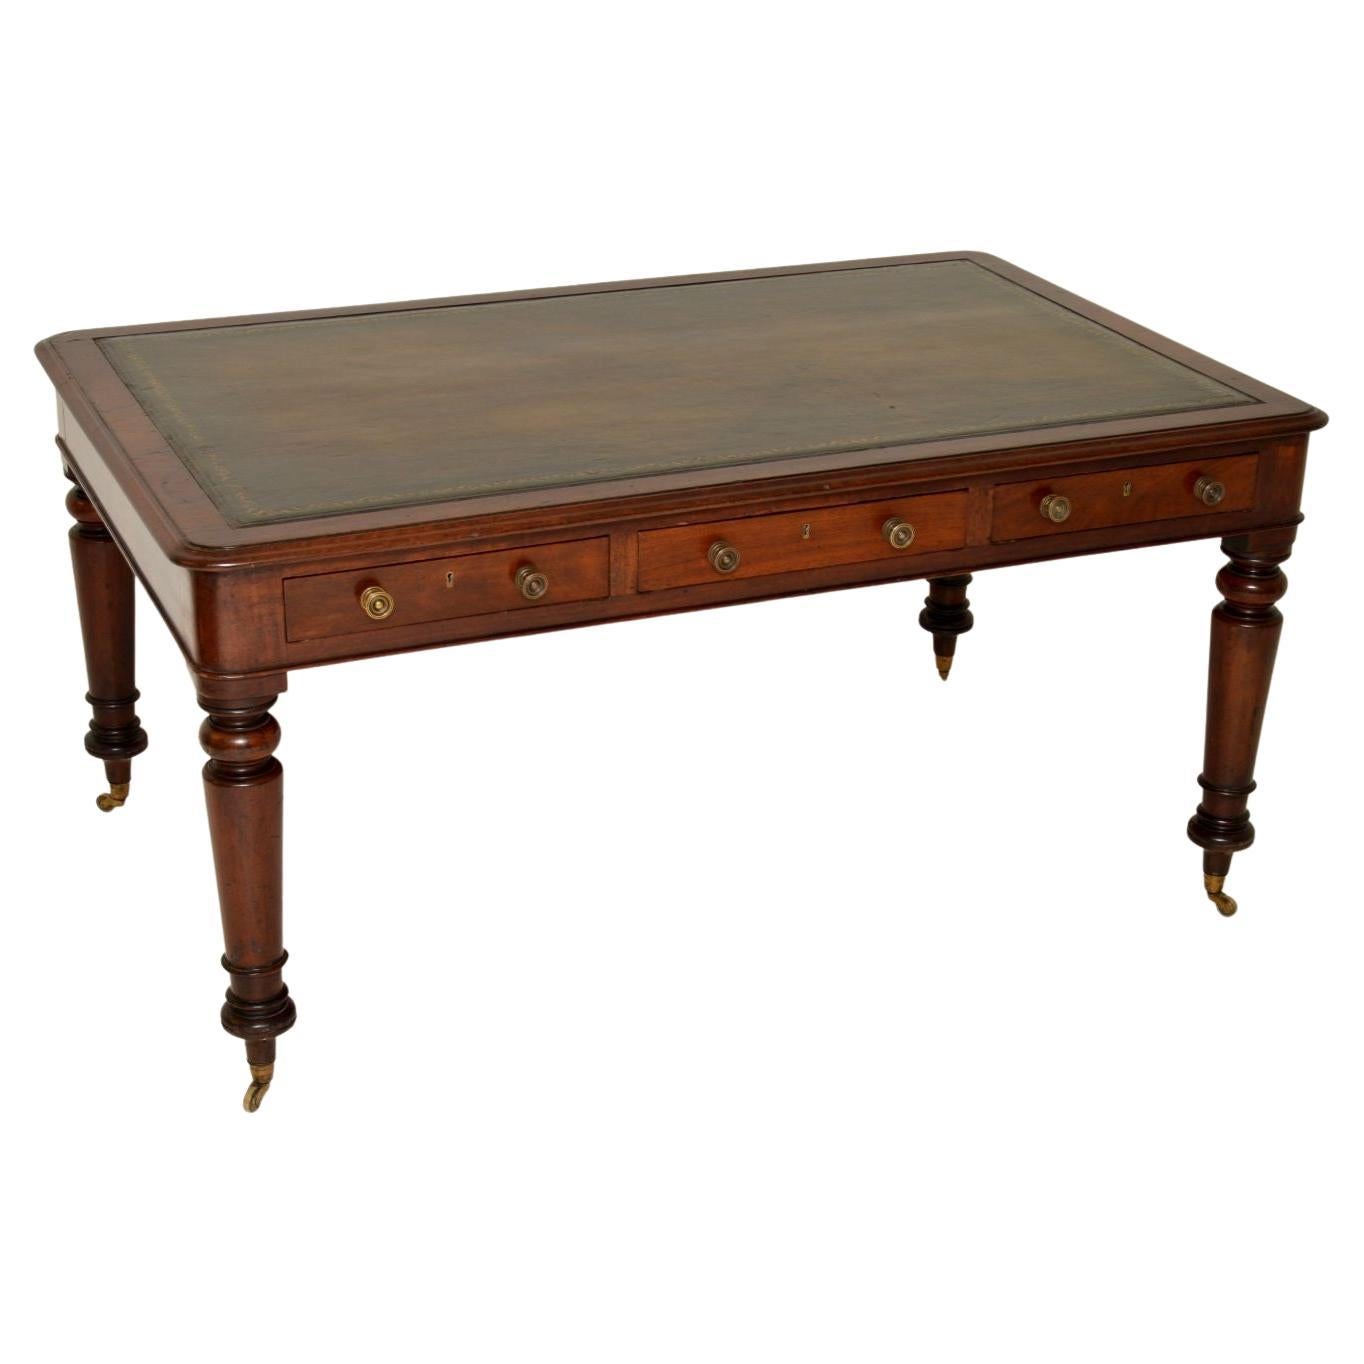 Antique Victorian Partners Desk / Writing Table